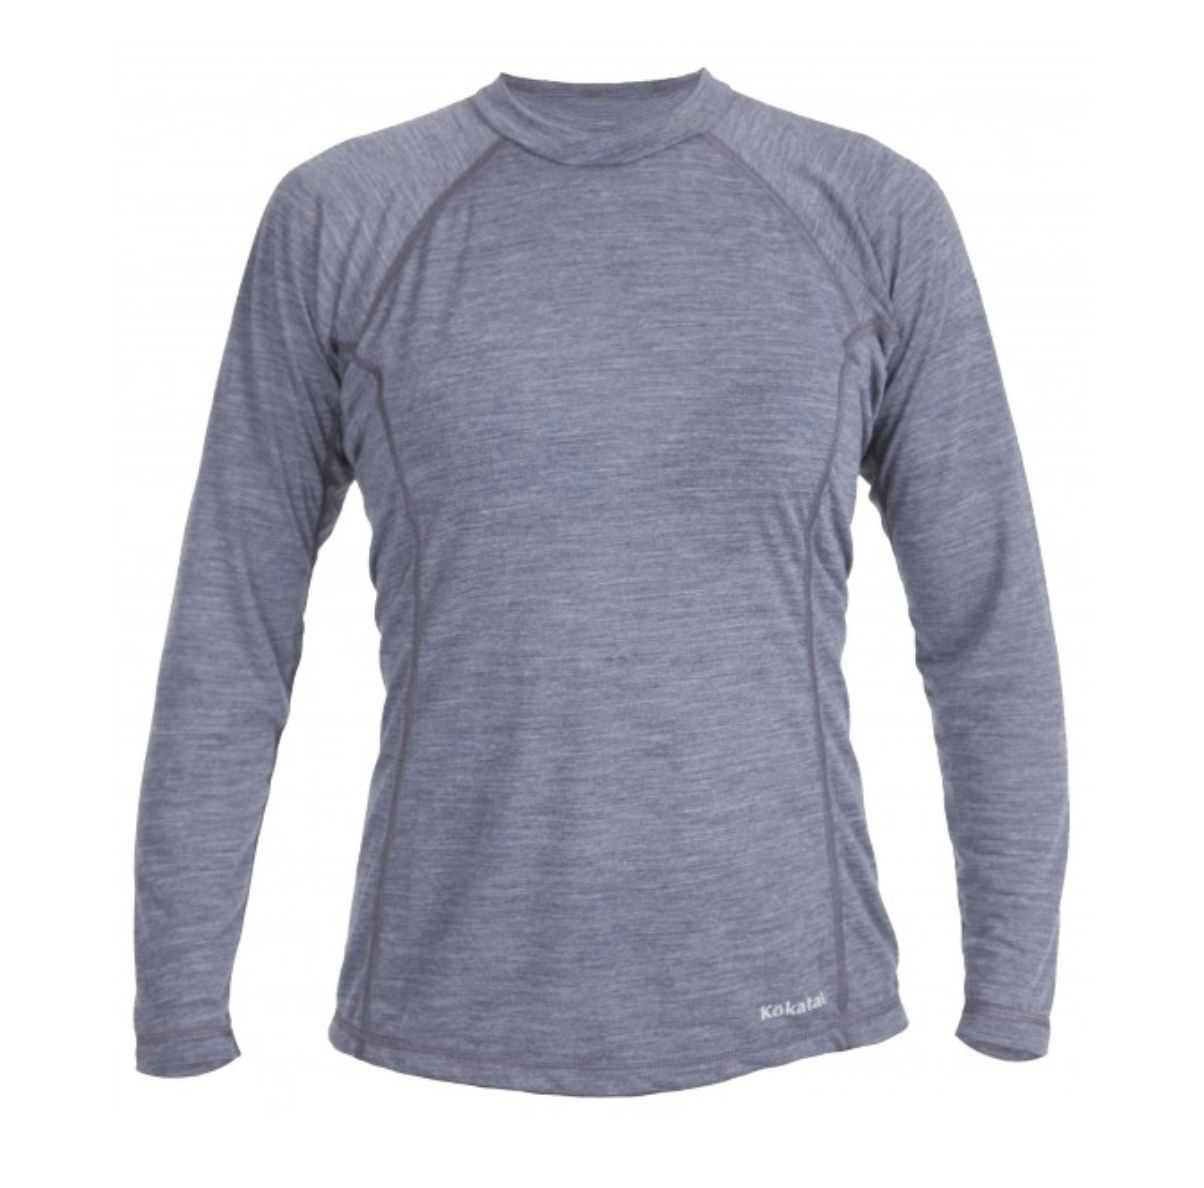 Clothing Layers for Paddling - SPF Shirts, Base Layer Shirts & More  [Paddling Buyer's Guide]